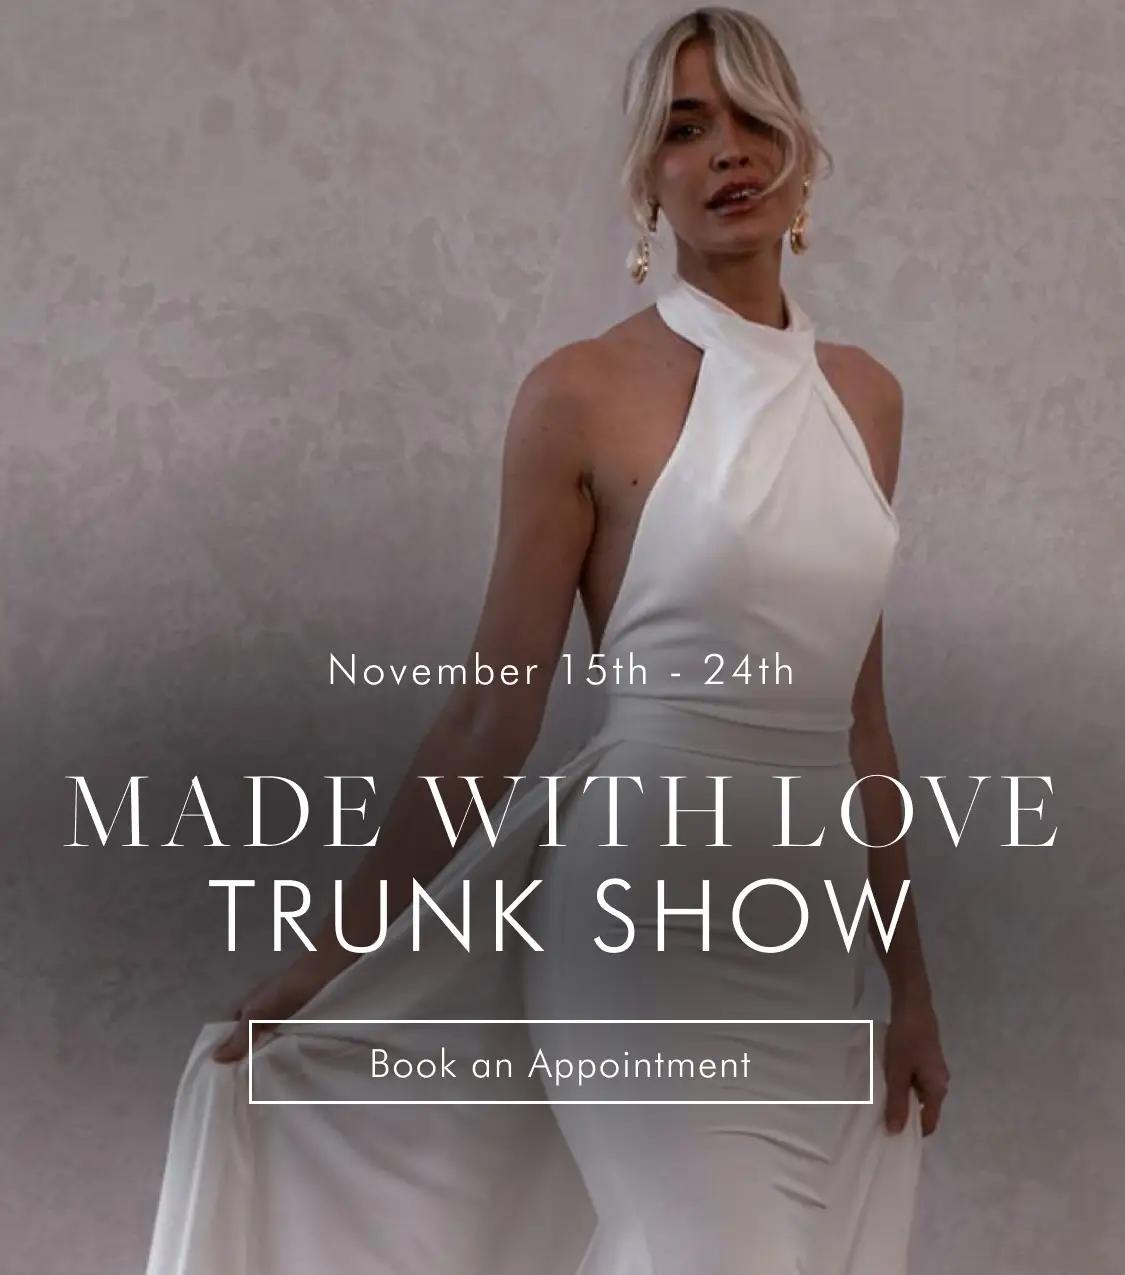 MWL Trunk Show Banner for mobile